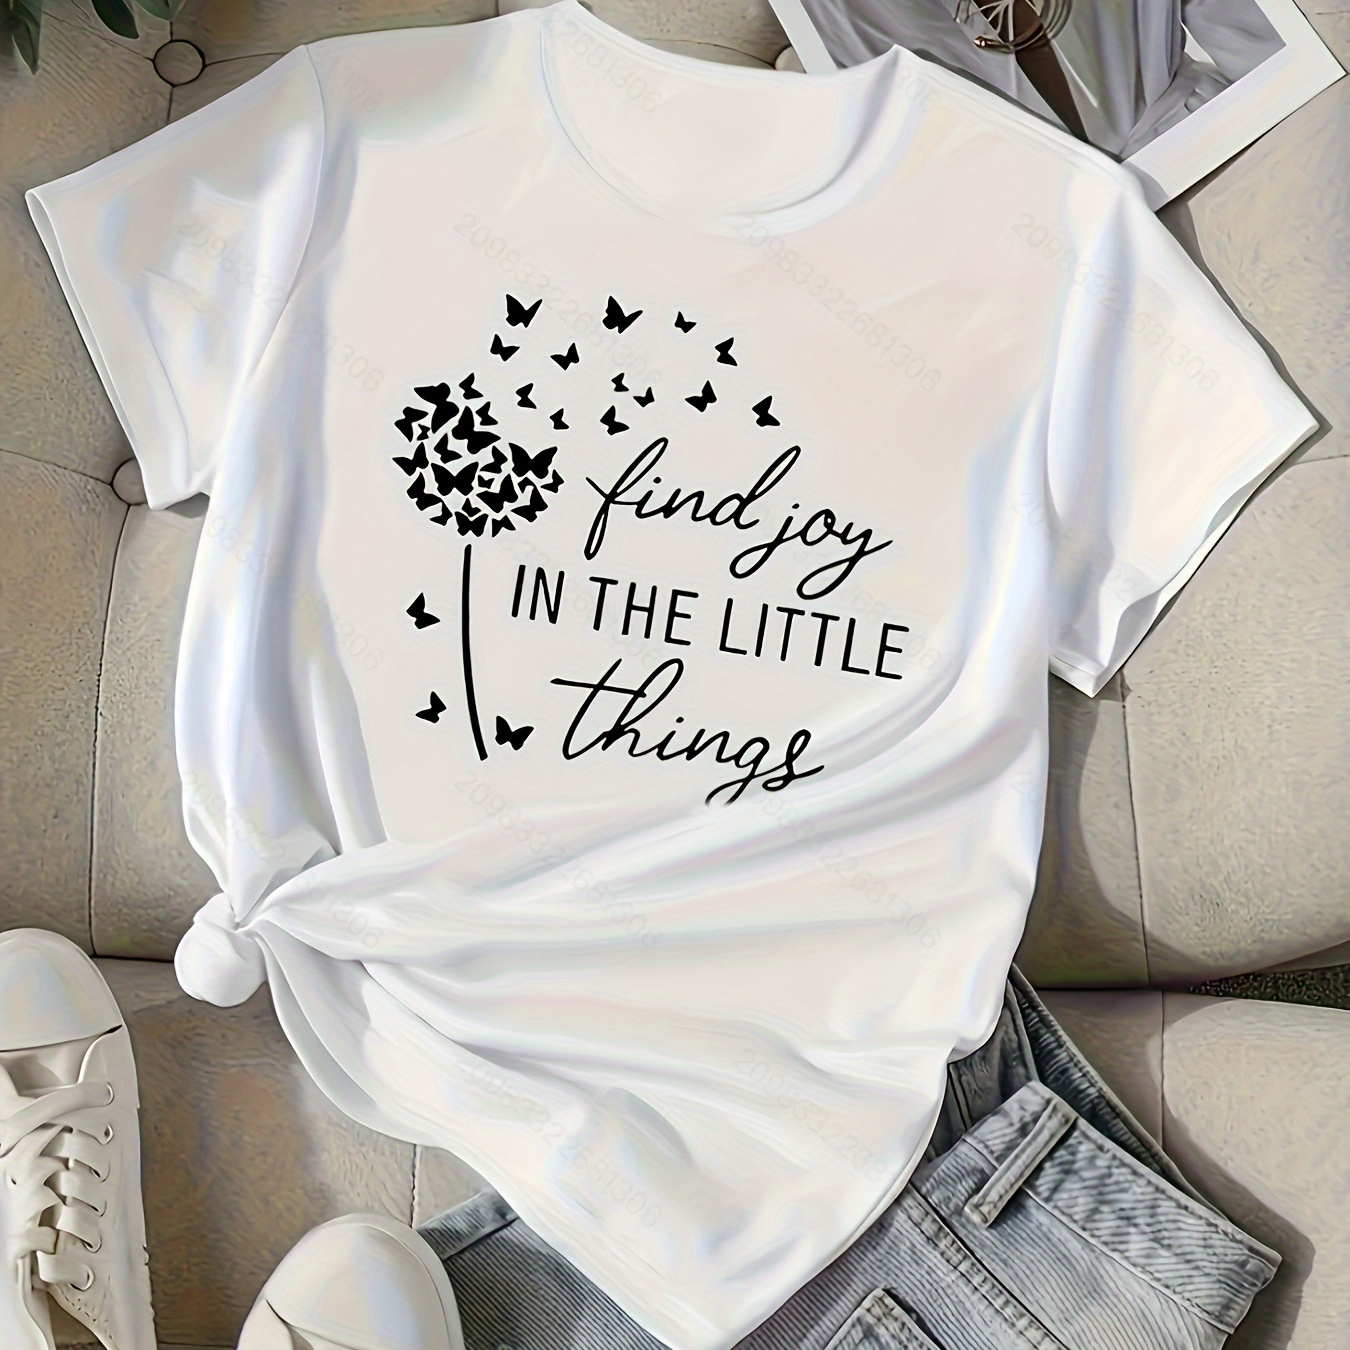 

Find Joy In The Little Things Print T-shirt, Casual Crew Neck Short Sleeve T-shirt For Spring & Summer, Women's Clothing